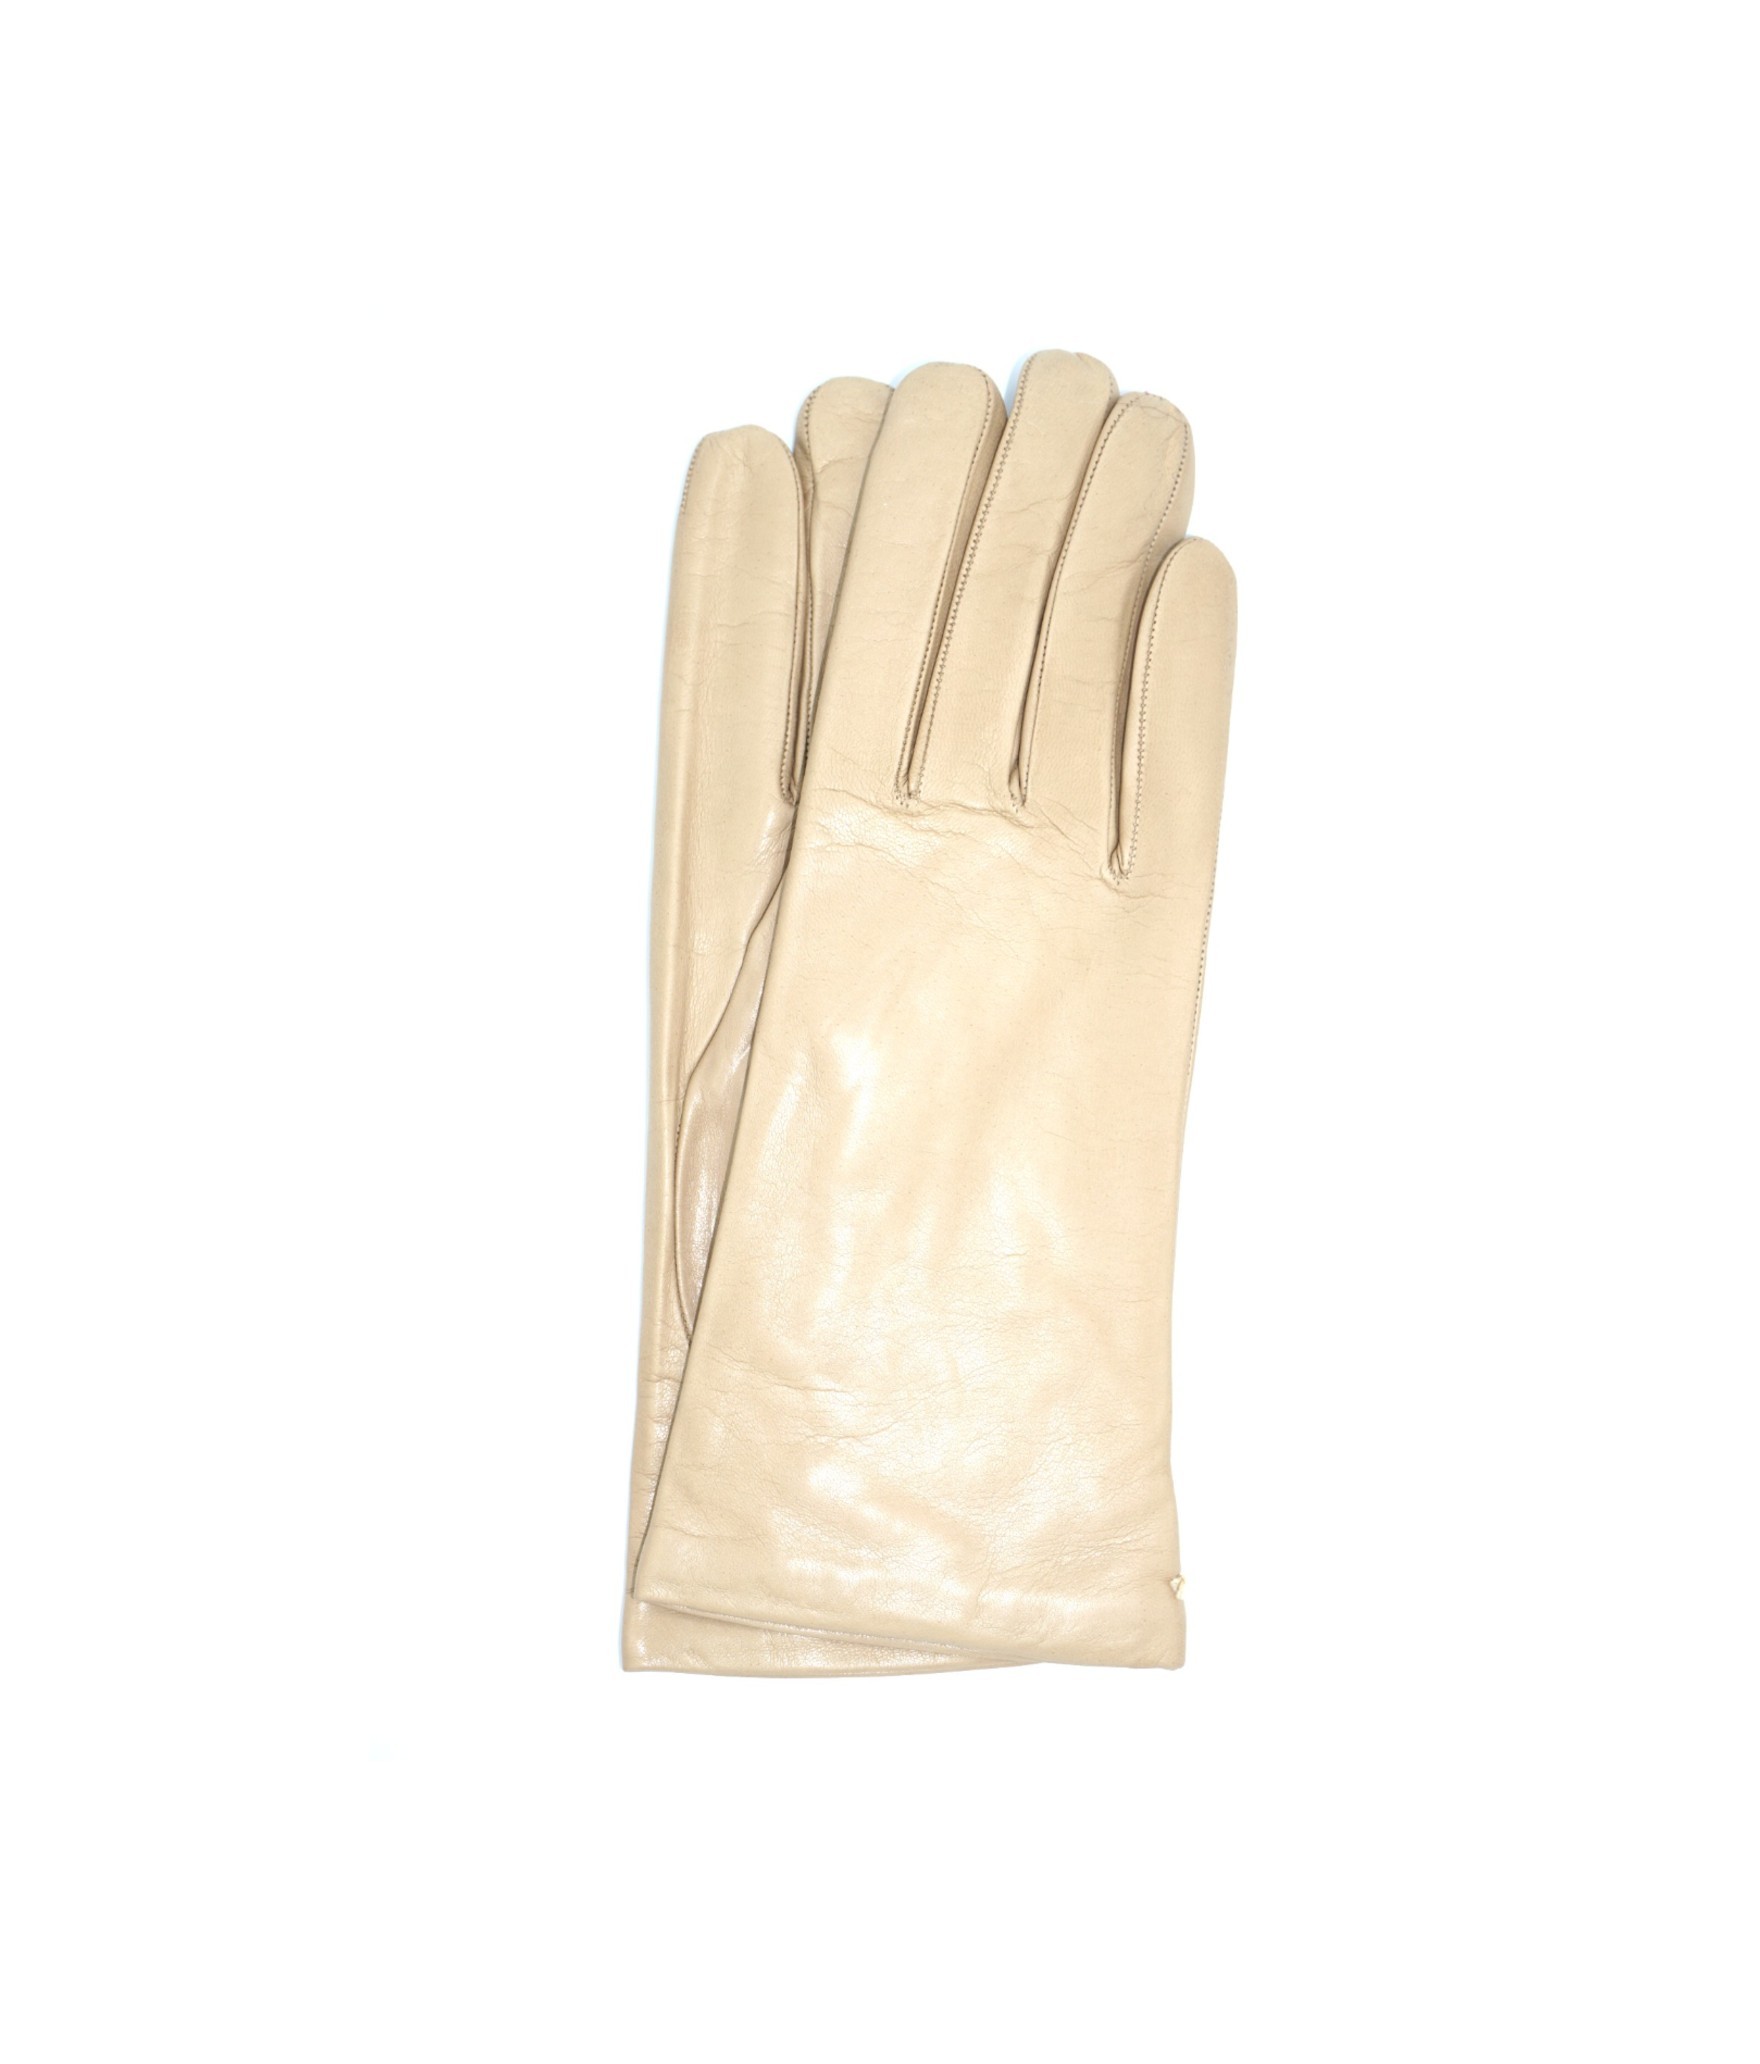 1011 Classic Kid Leather Gloves Cashmere Lined Light Beige 